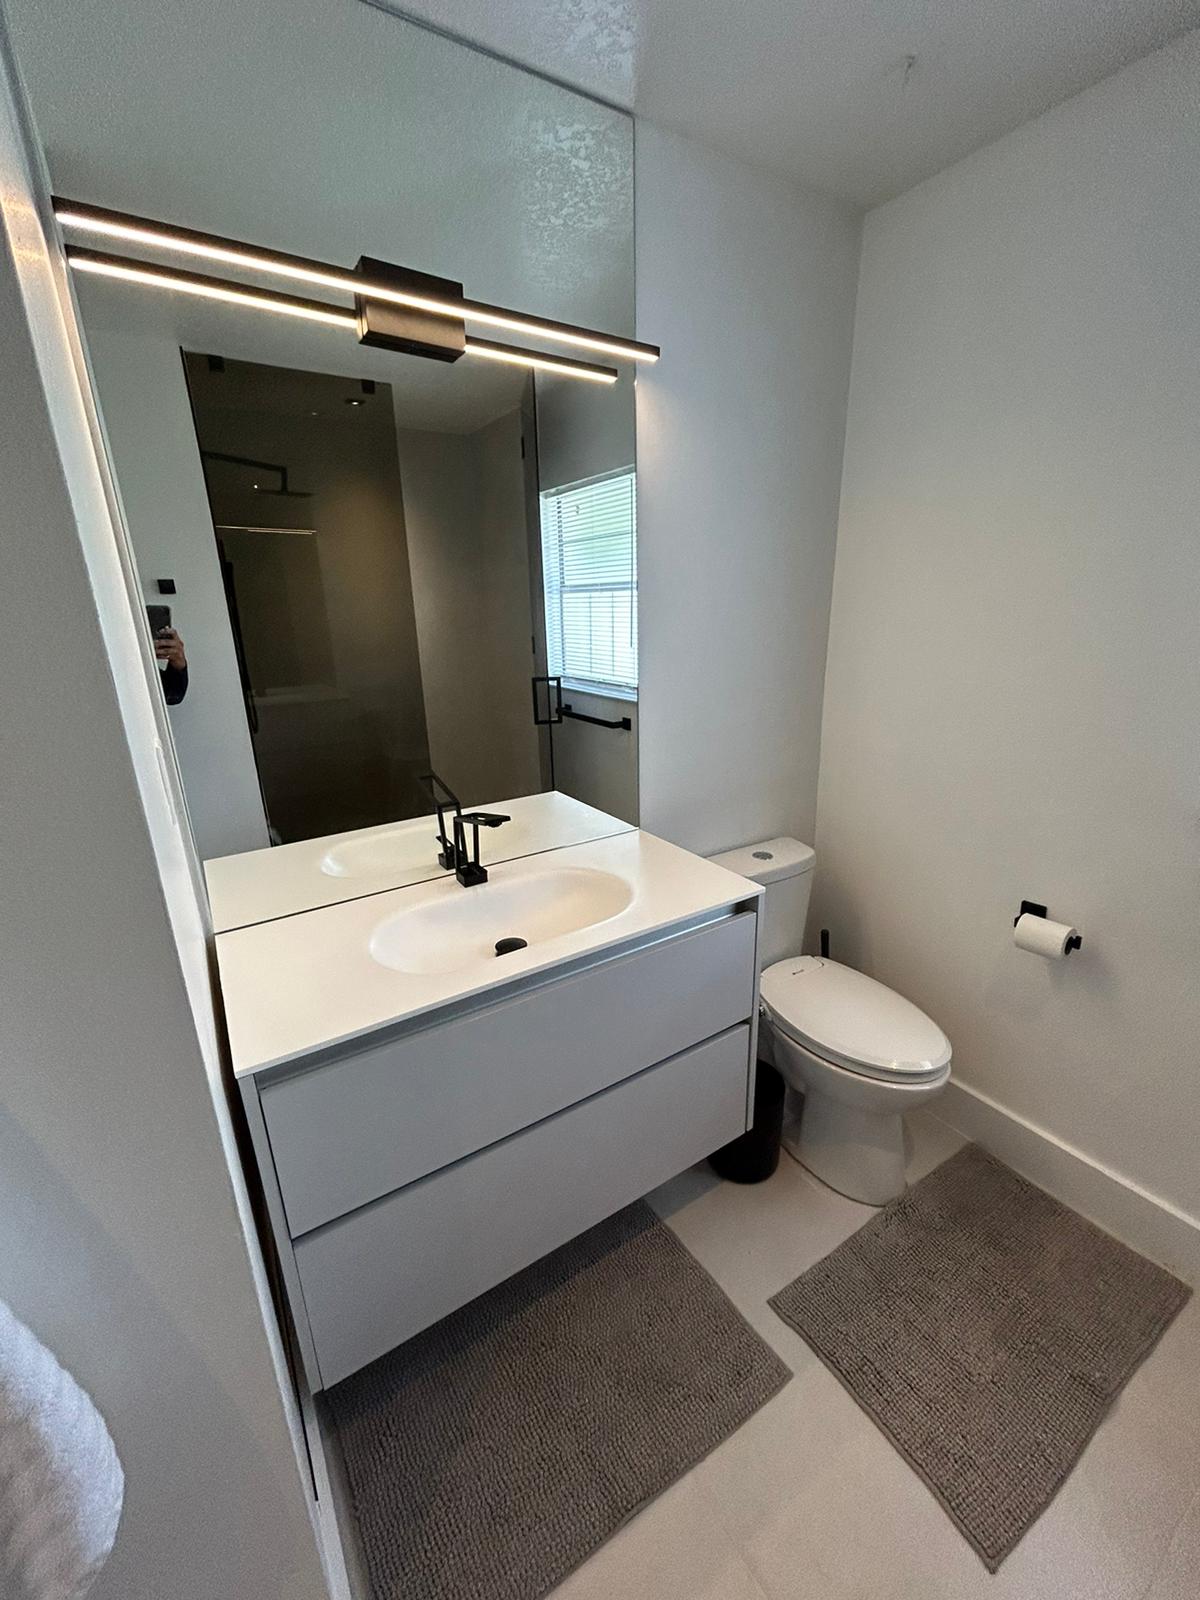 An amazing bathroom that our company renovated